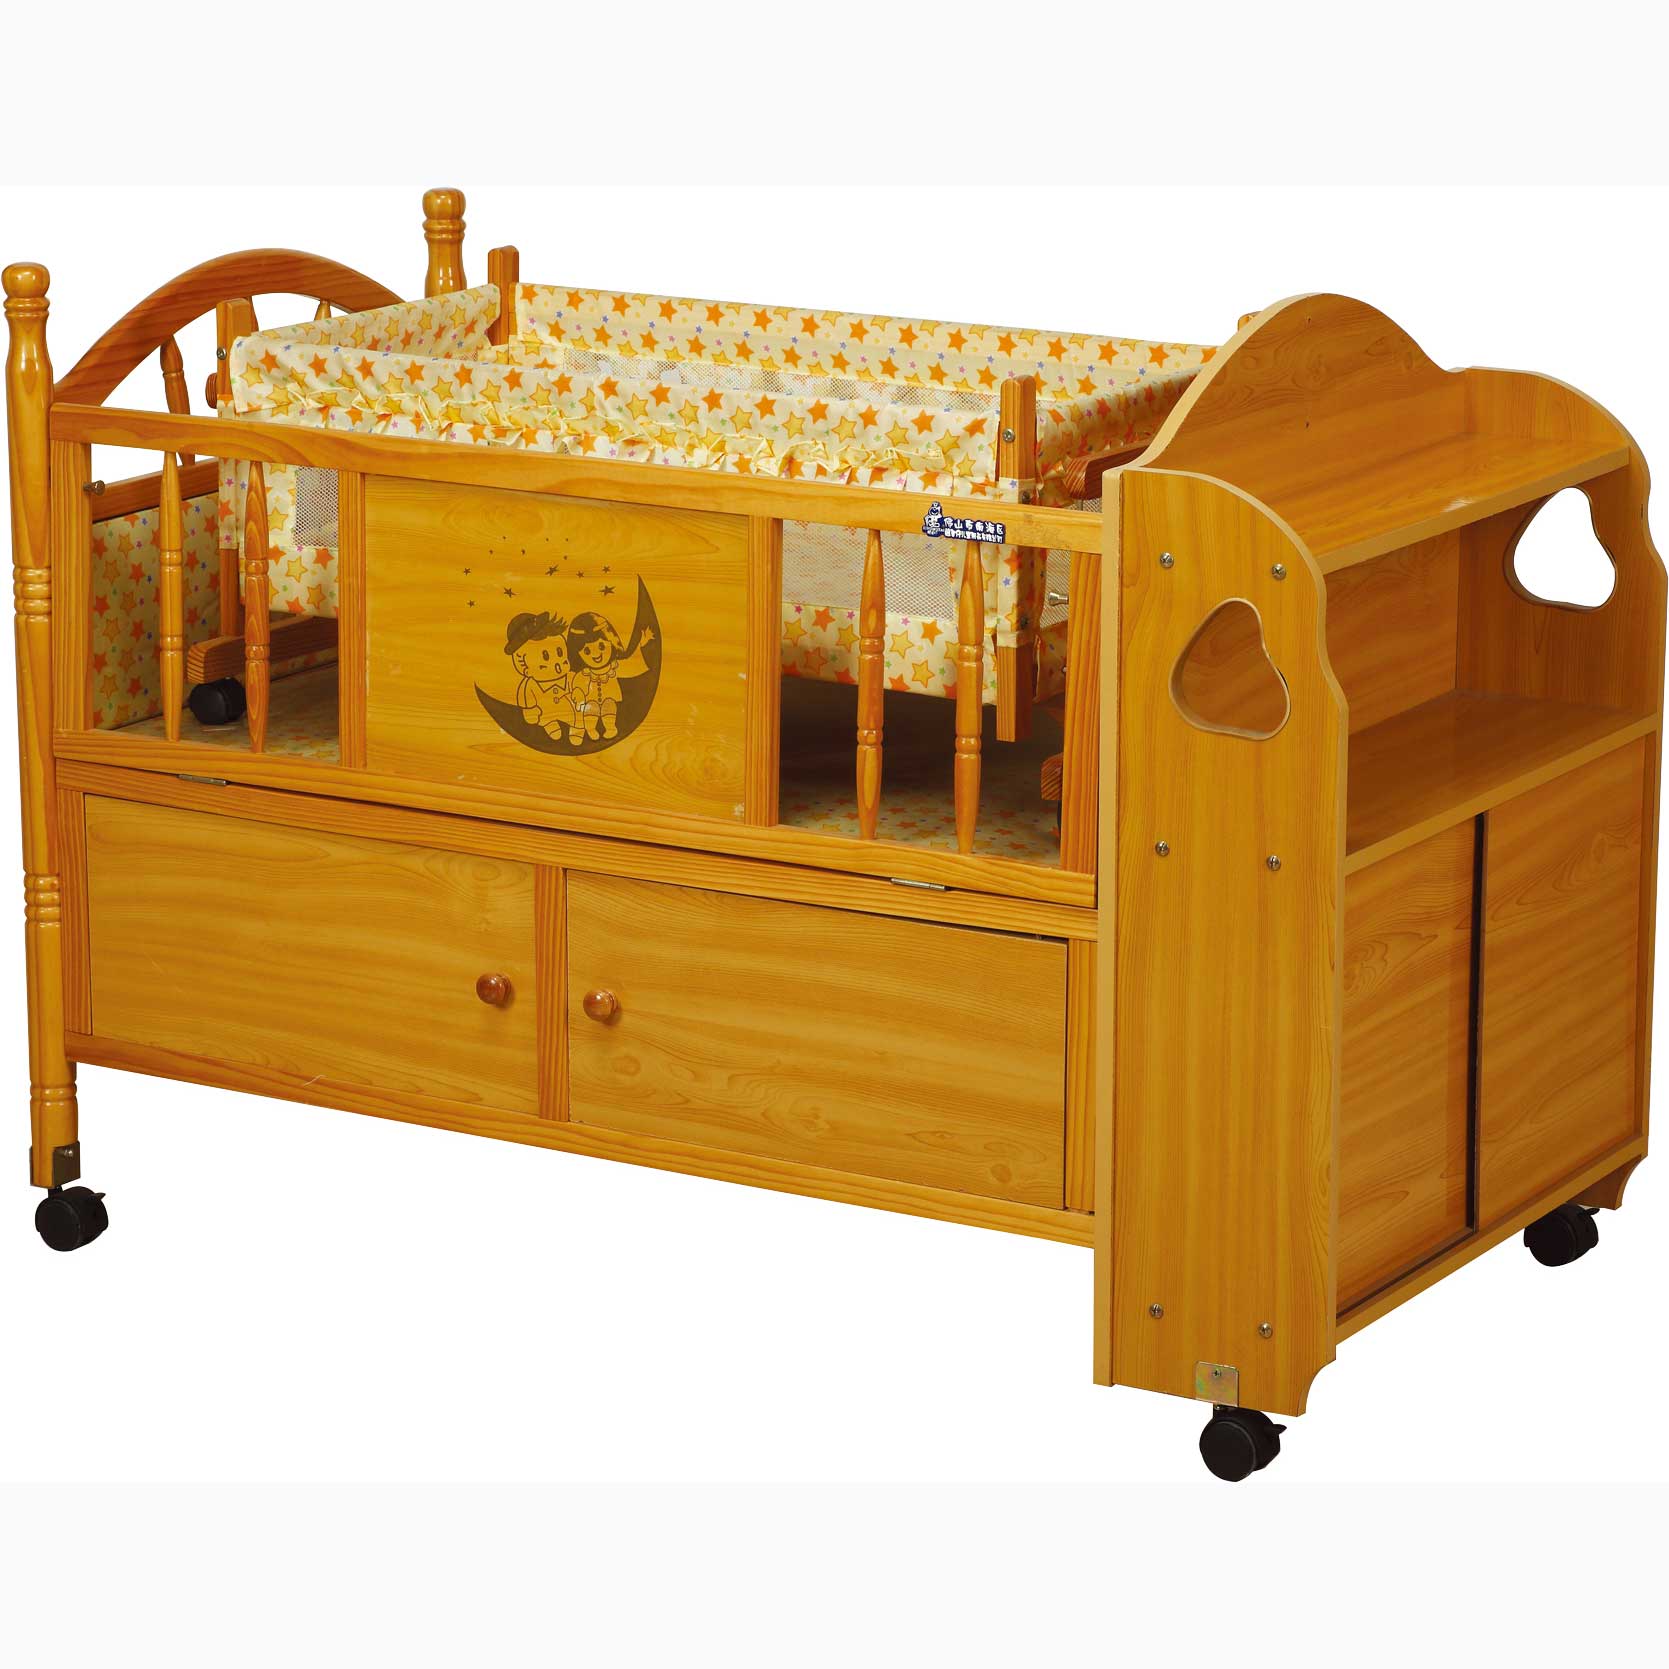 Solid wooden bed with drawer CWC5110N